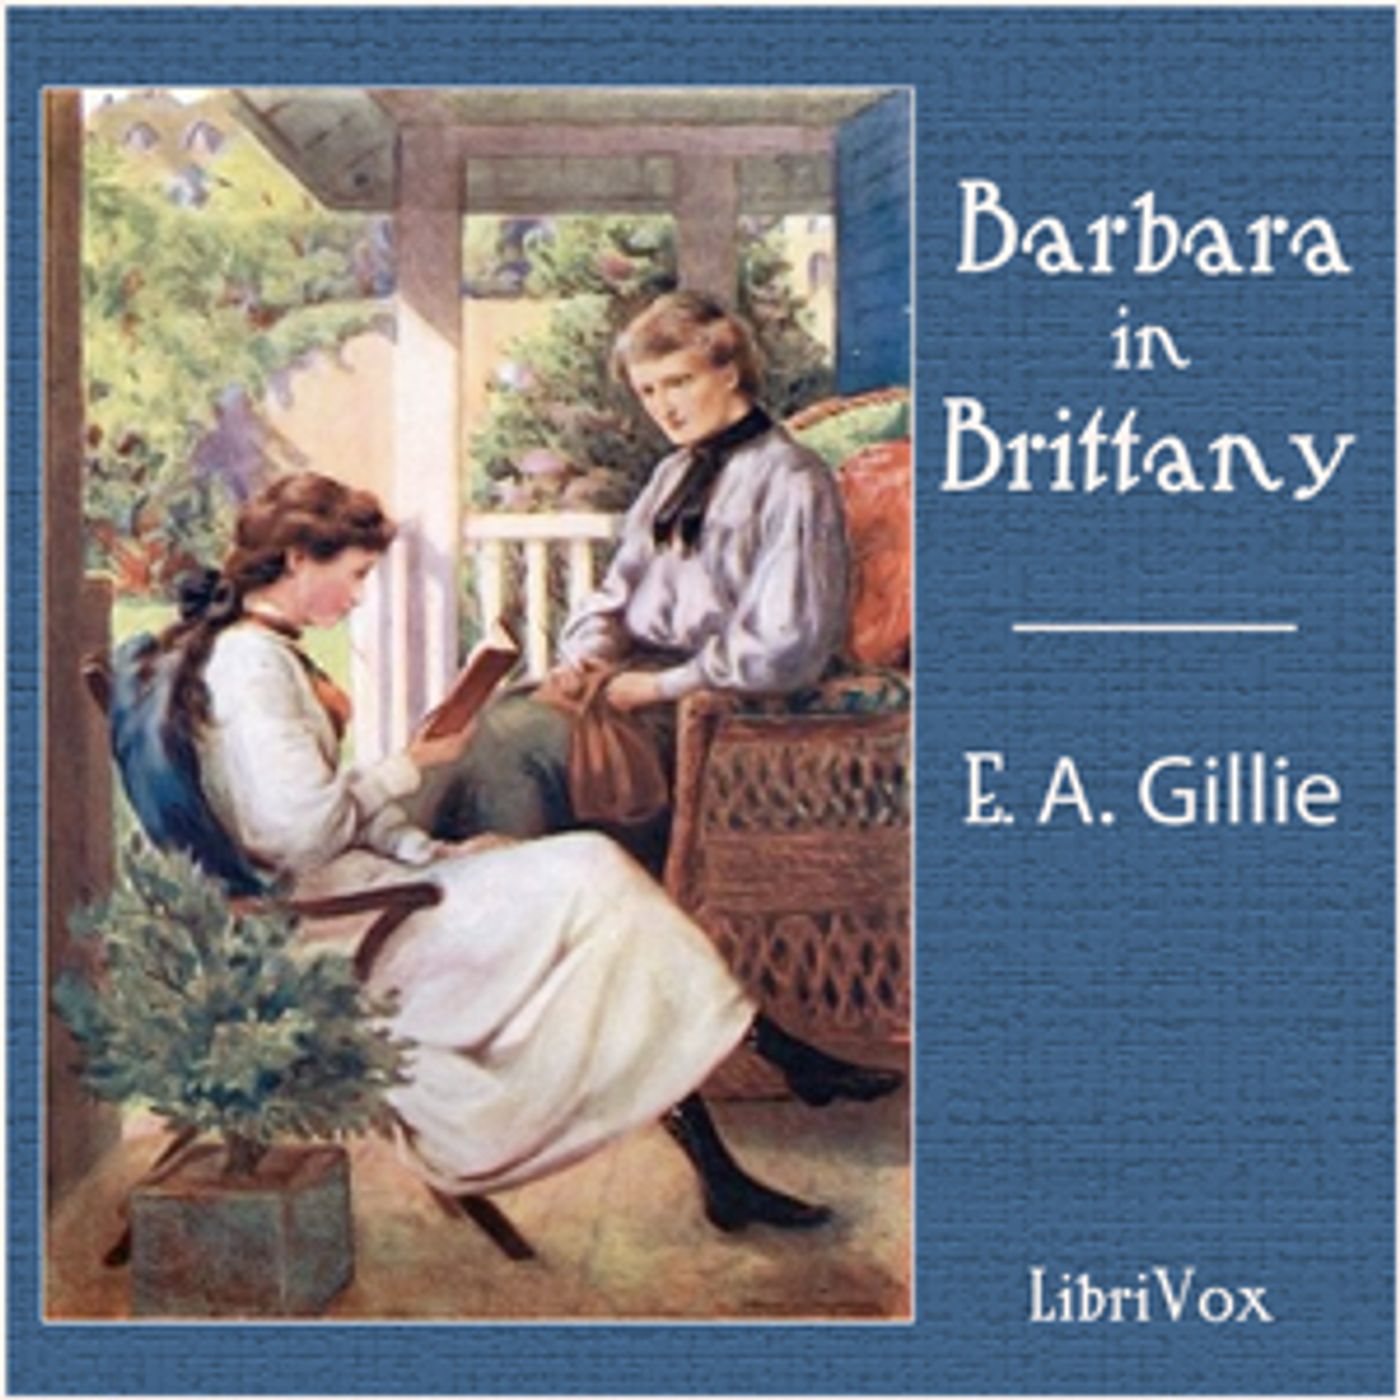 Barbara in Brittany by  E. A. Gillie